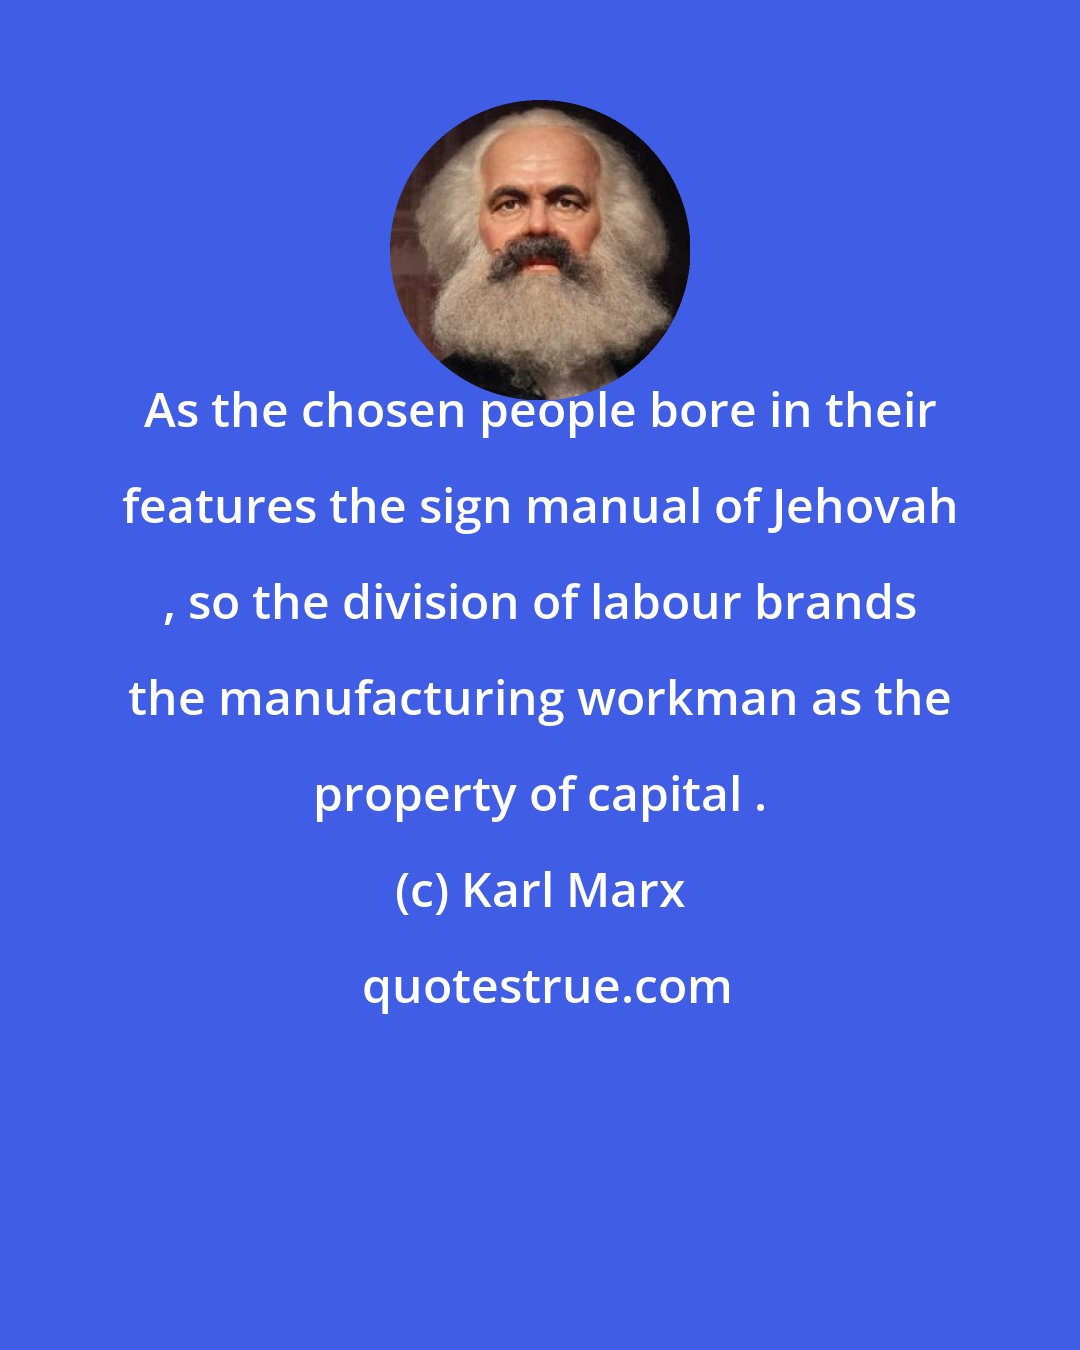 Karl Marx: As the chosen people bore in their features the sign manual of Jehovah , so the division of labour brands the manufacturing workman as the property of capital .